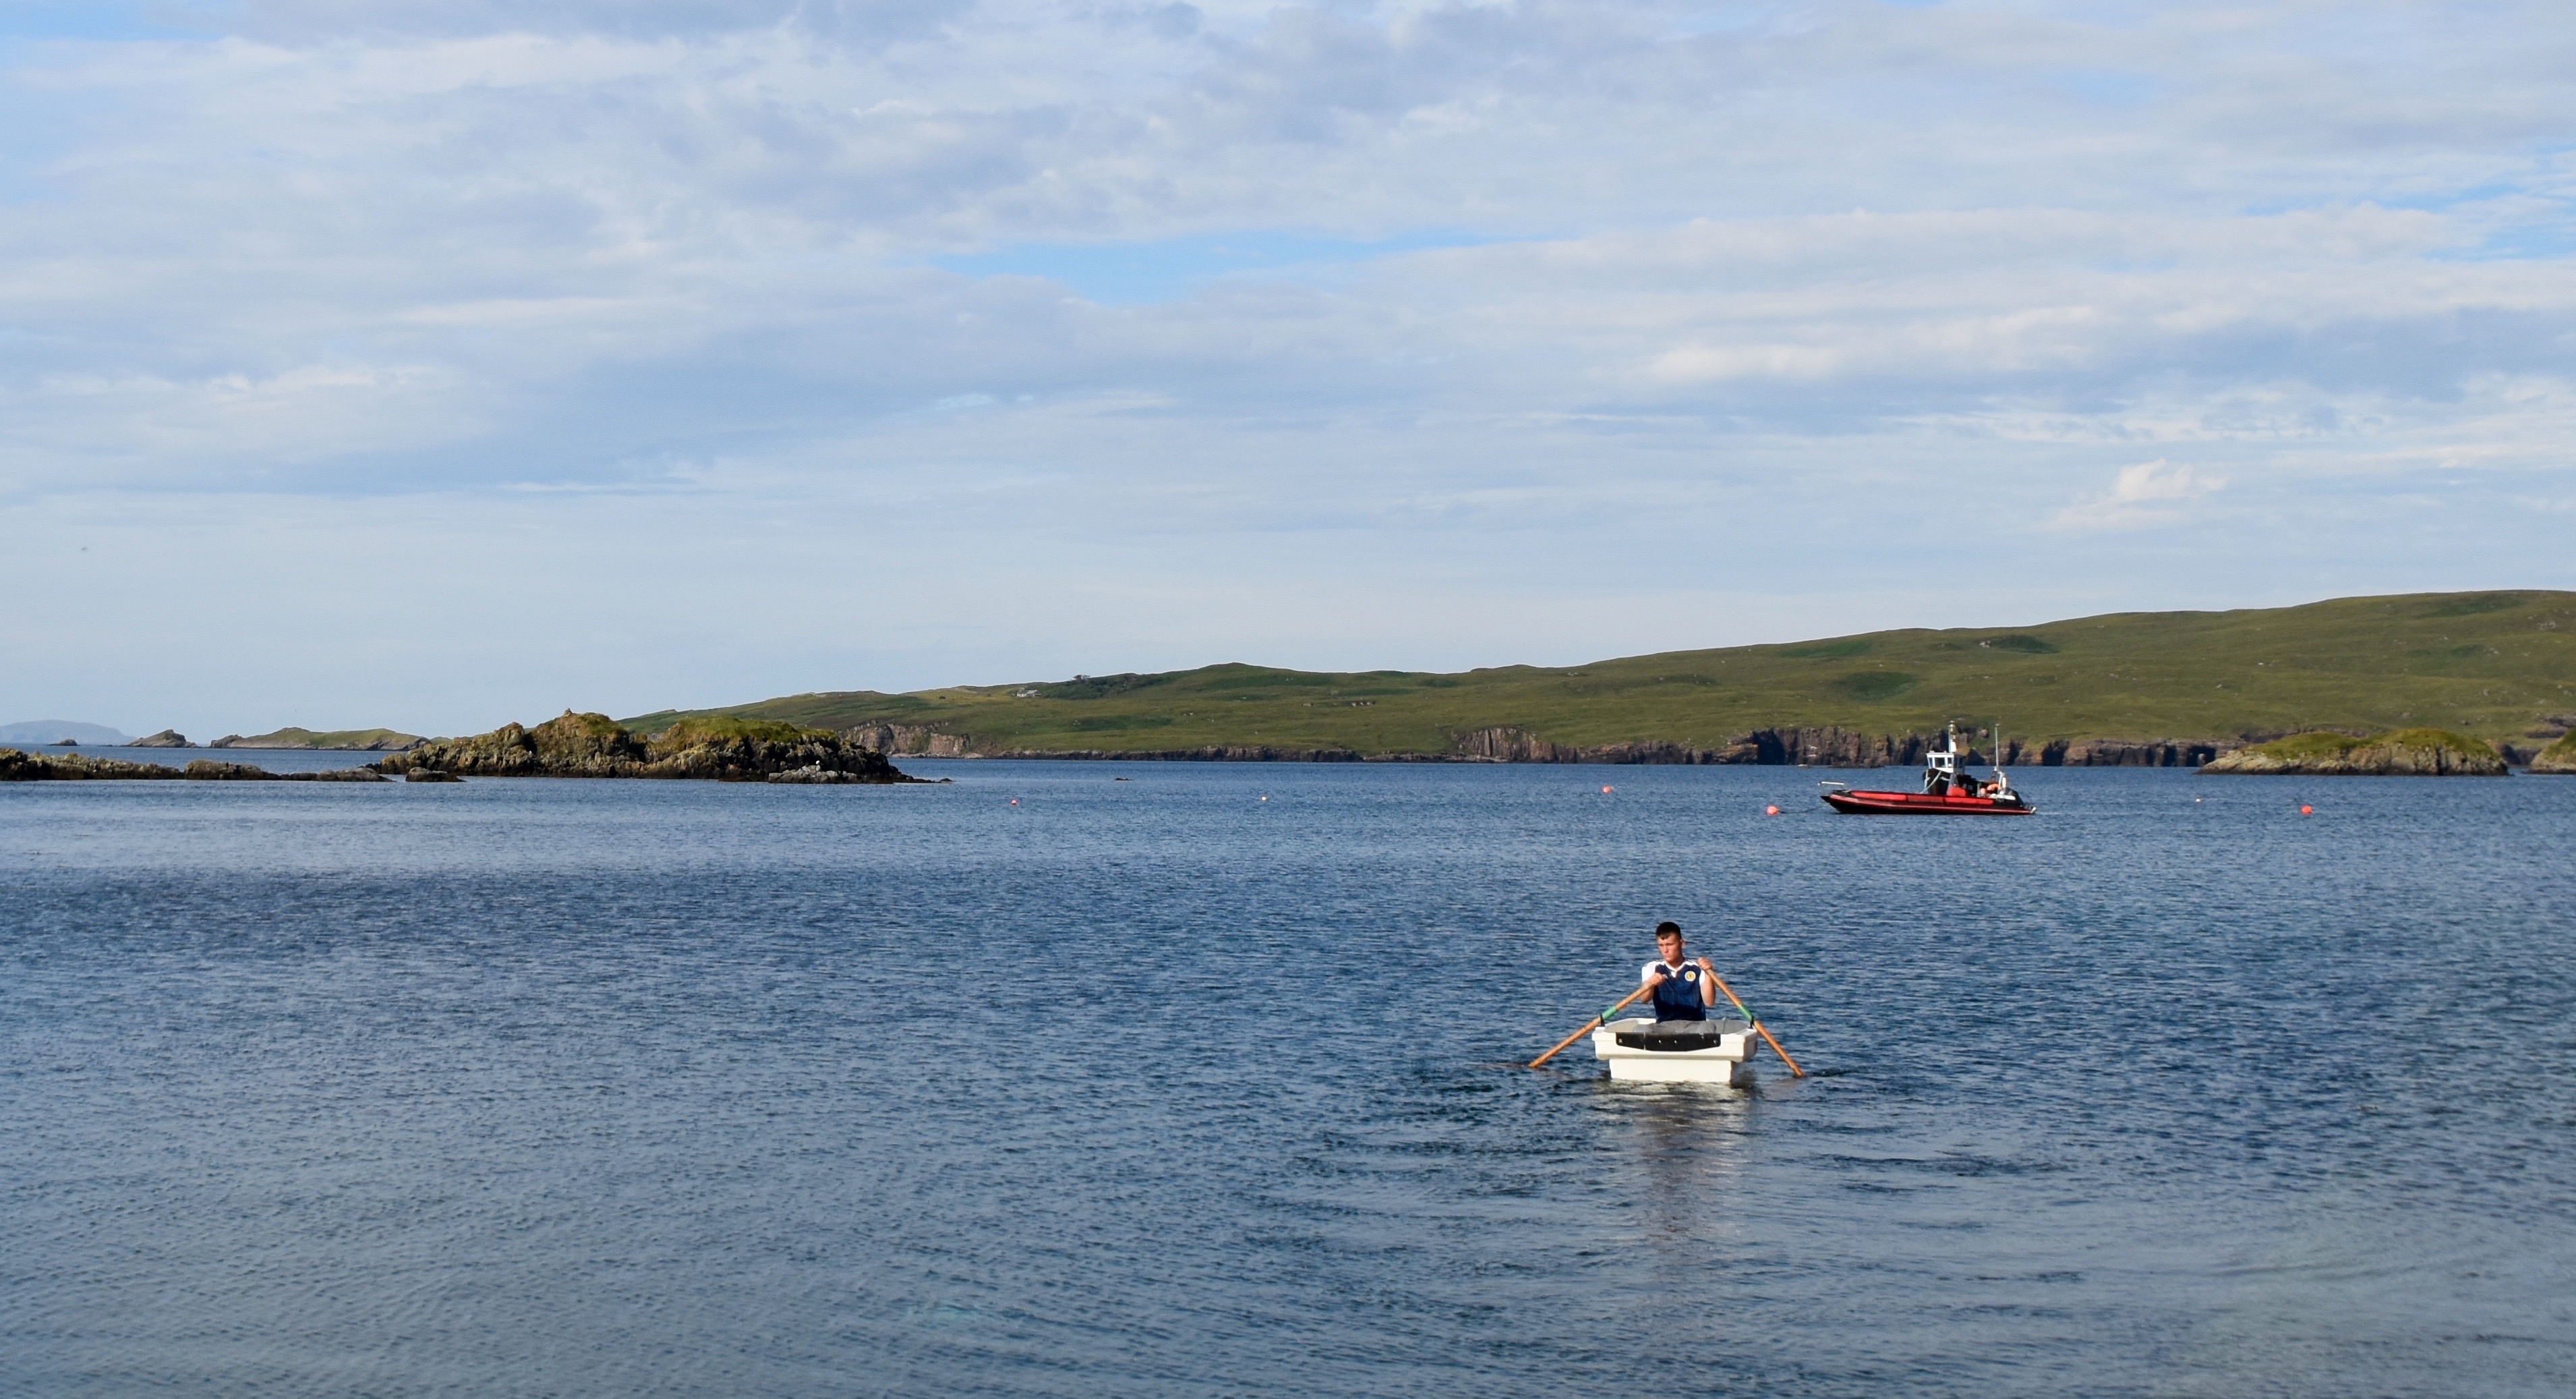 Rowing to get the Boat to Handa